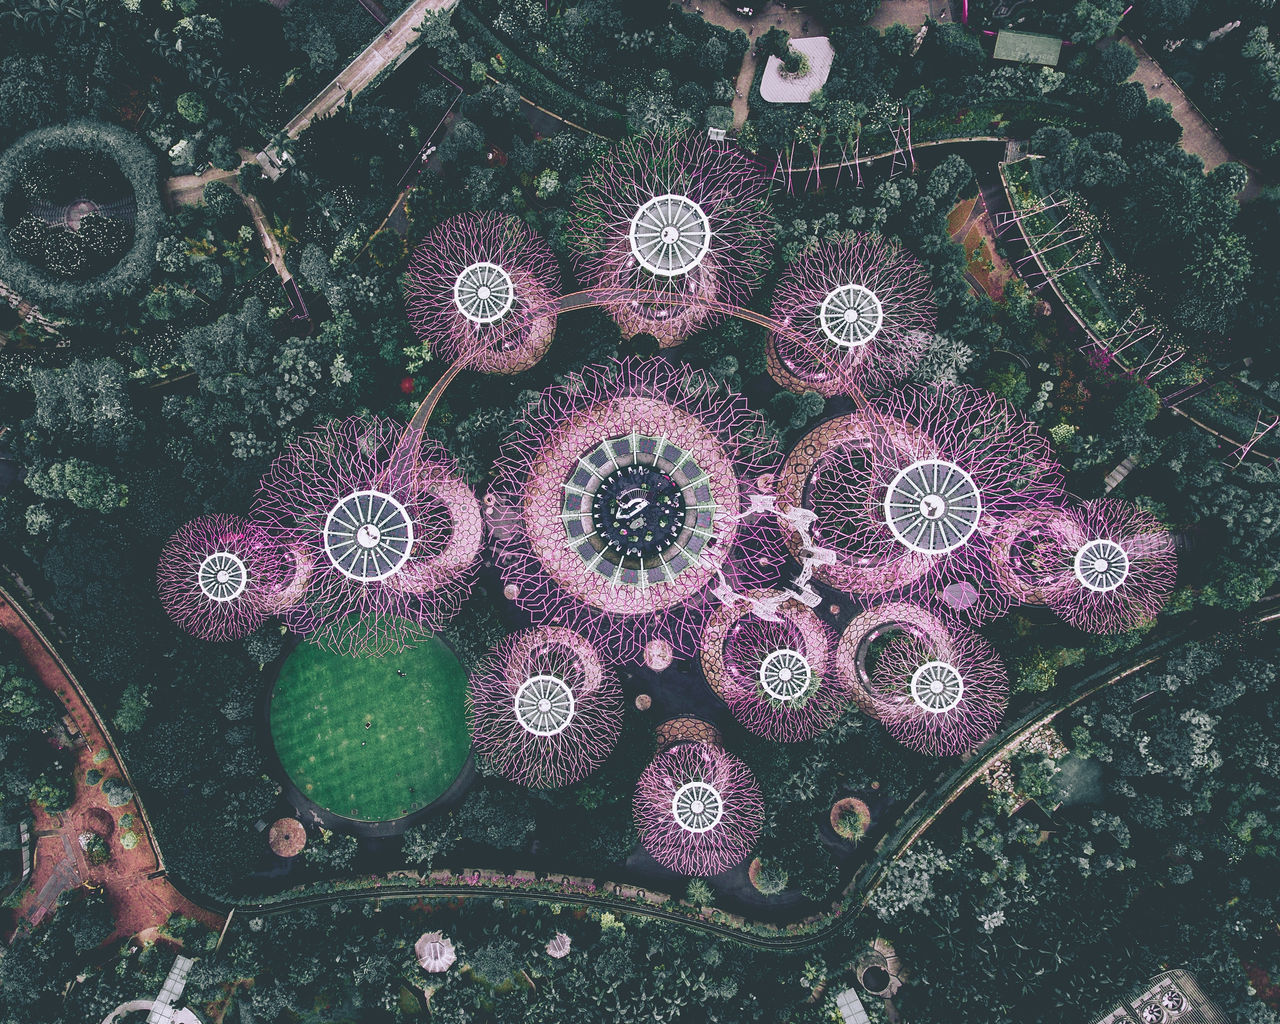 500px Photo ID: 181745479 - Gardens by the Bay from above, Singapore